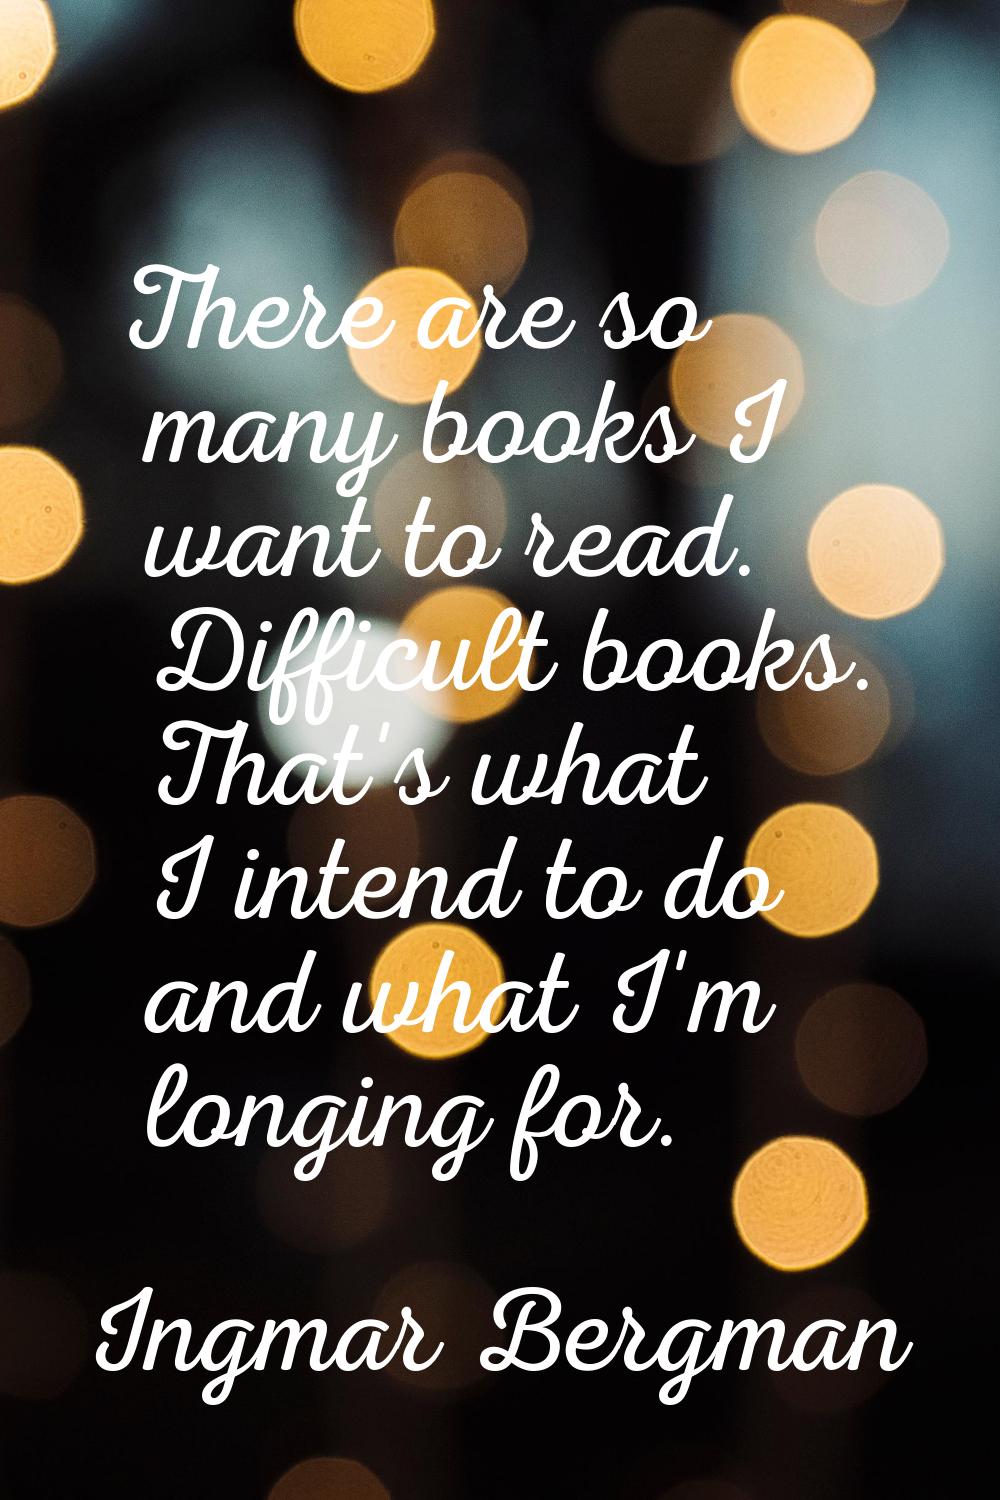 There are so many books I want to read. Difficult books. That's what I intend to do and what I'm lo